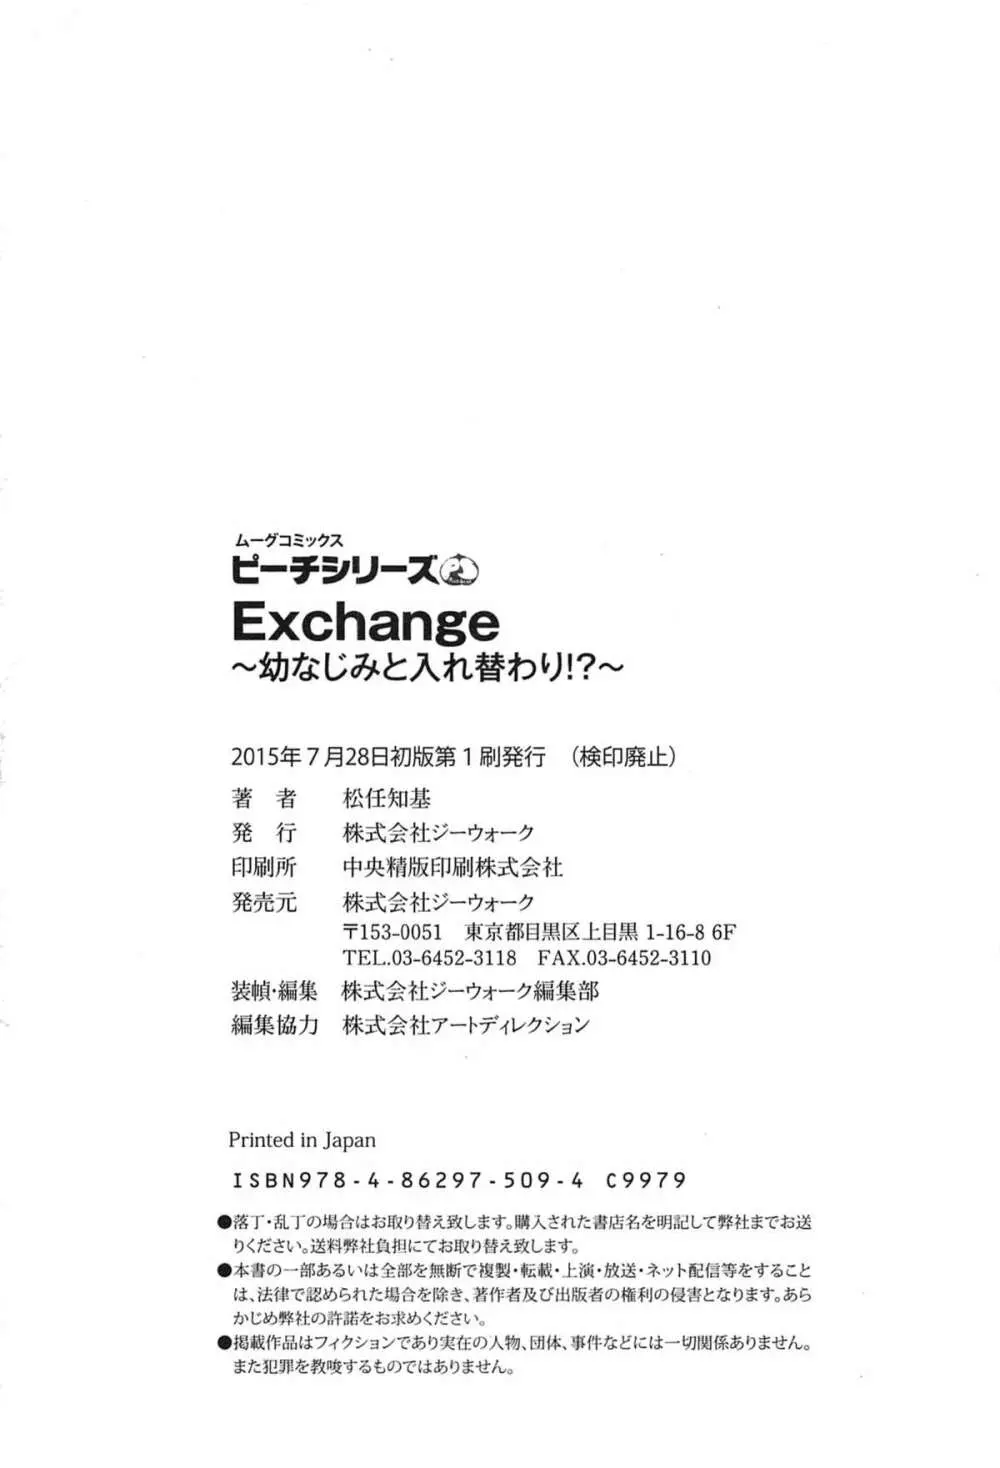 Exchange ～幼なじみと入れ替わり！？～ 225ページ